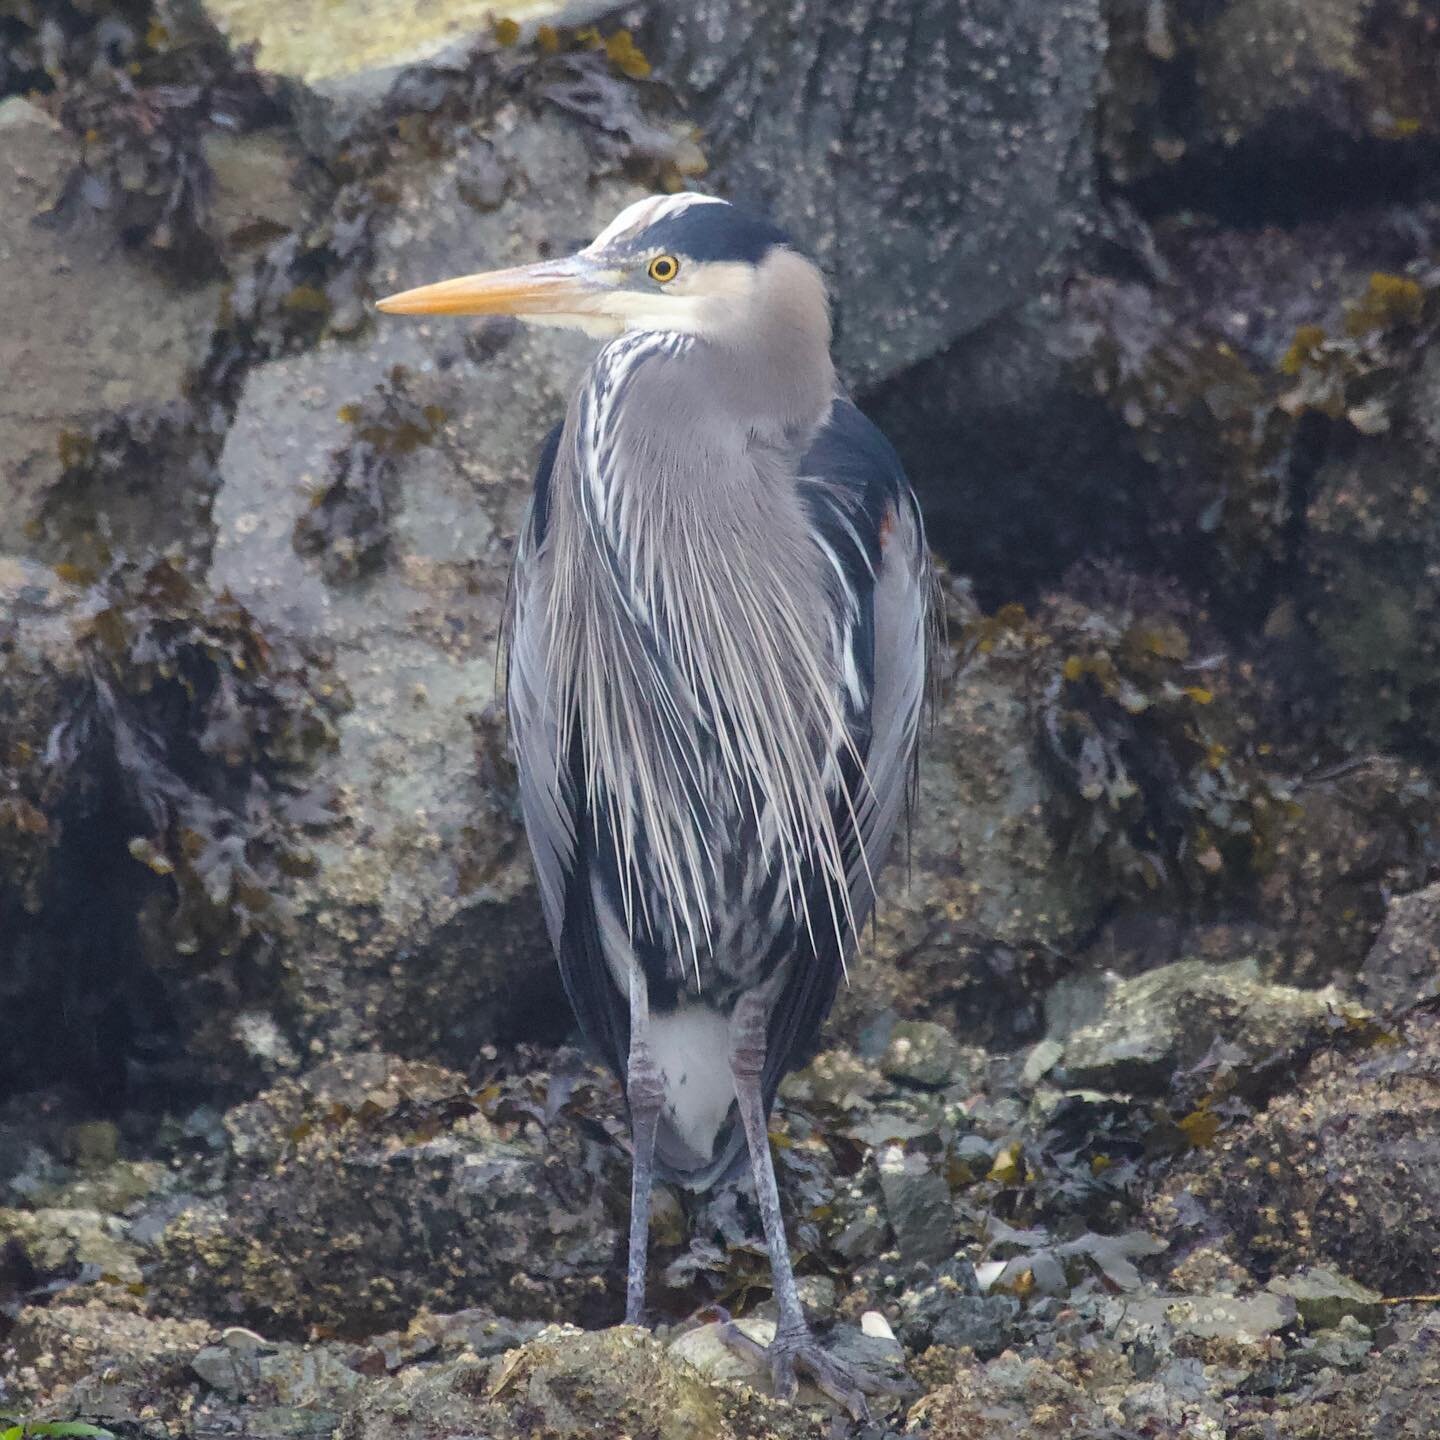 The Great Blue Heron. Did you know they stand 135 centimetres high, the biggest Great Blue Herons are taller than many grade 3 students. However, they weigh only 2 to 3 kilograms, about the same size as a small baby. 

We are adding Tofino Bird Watch